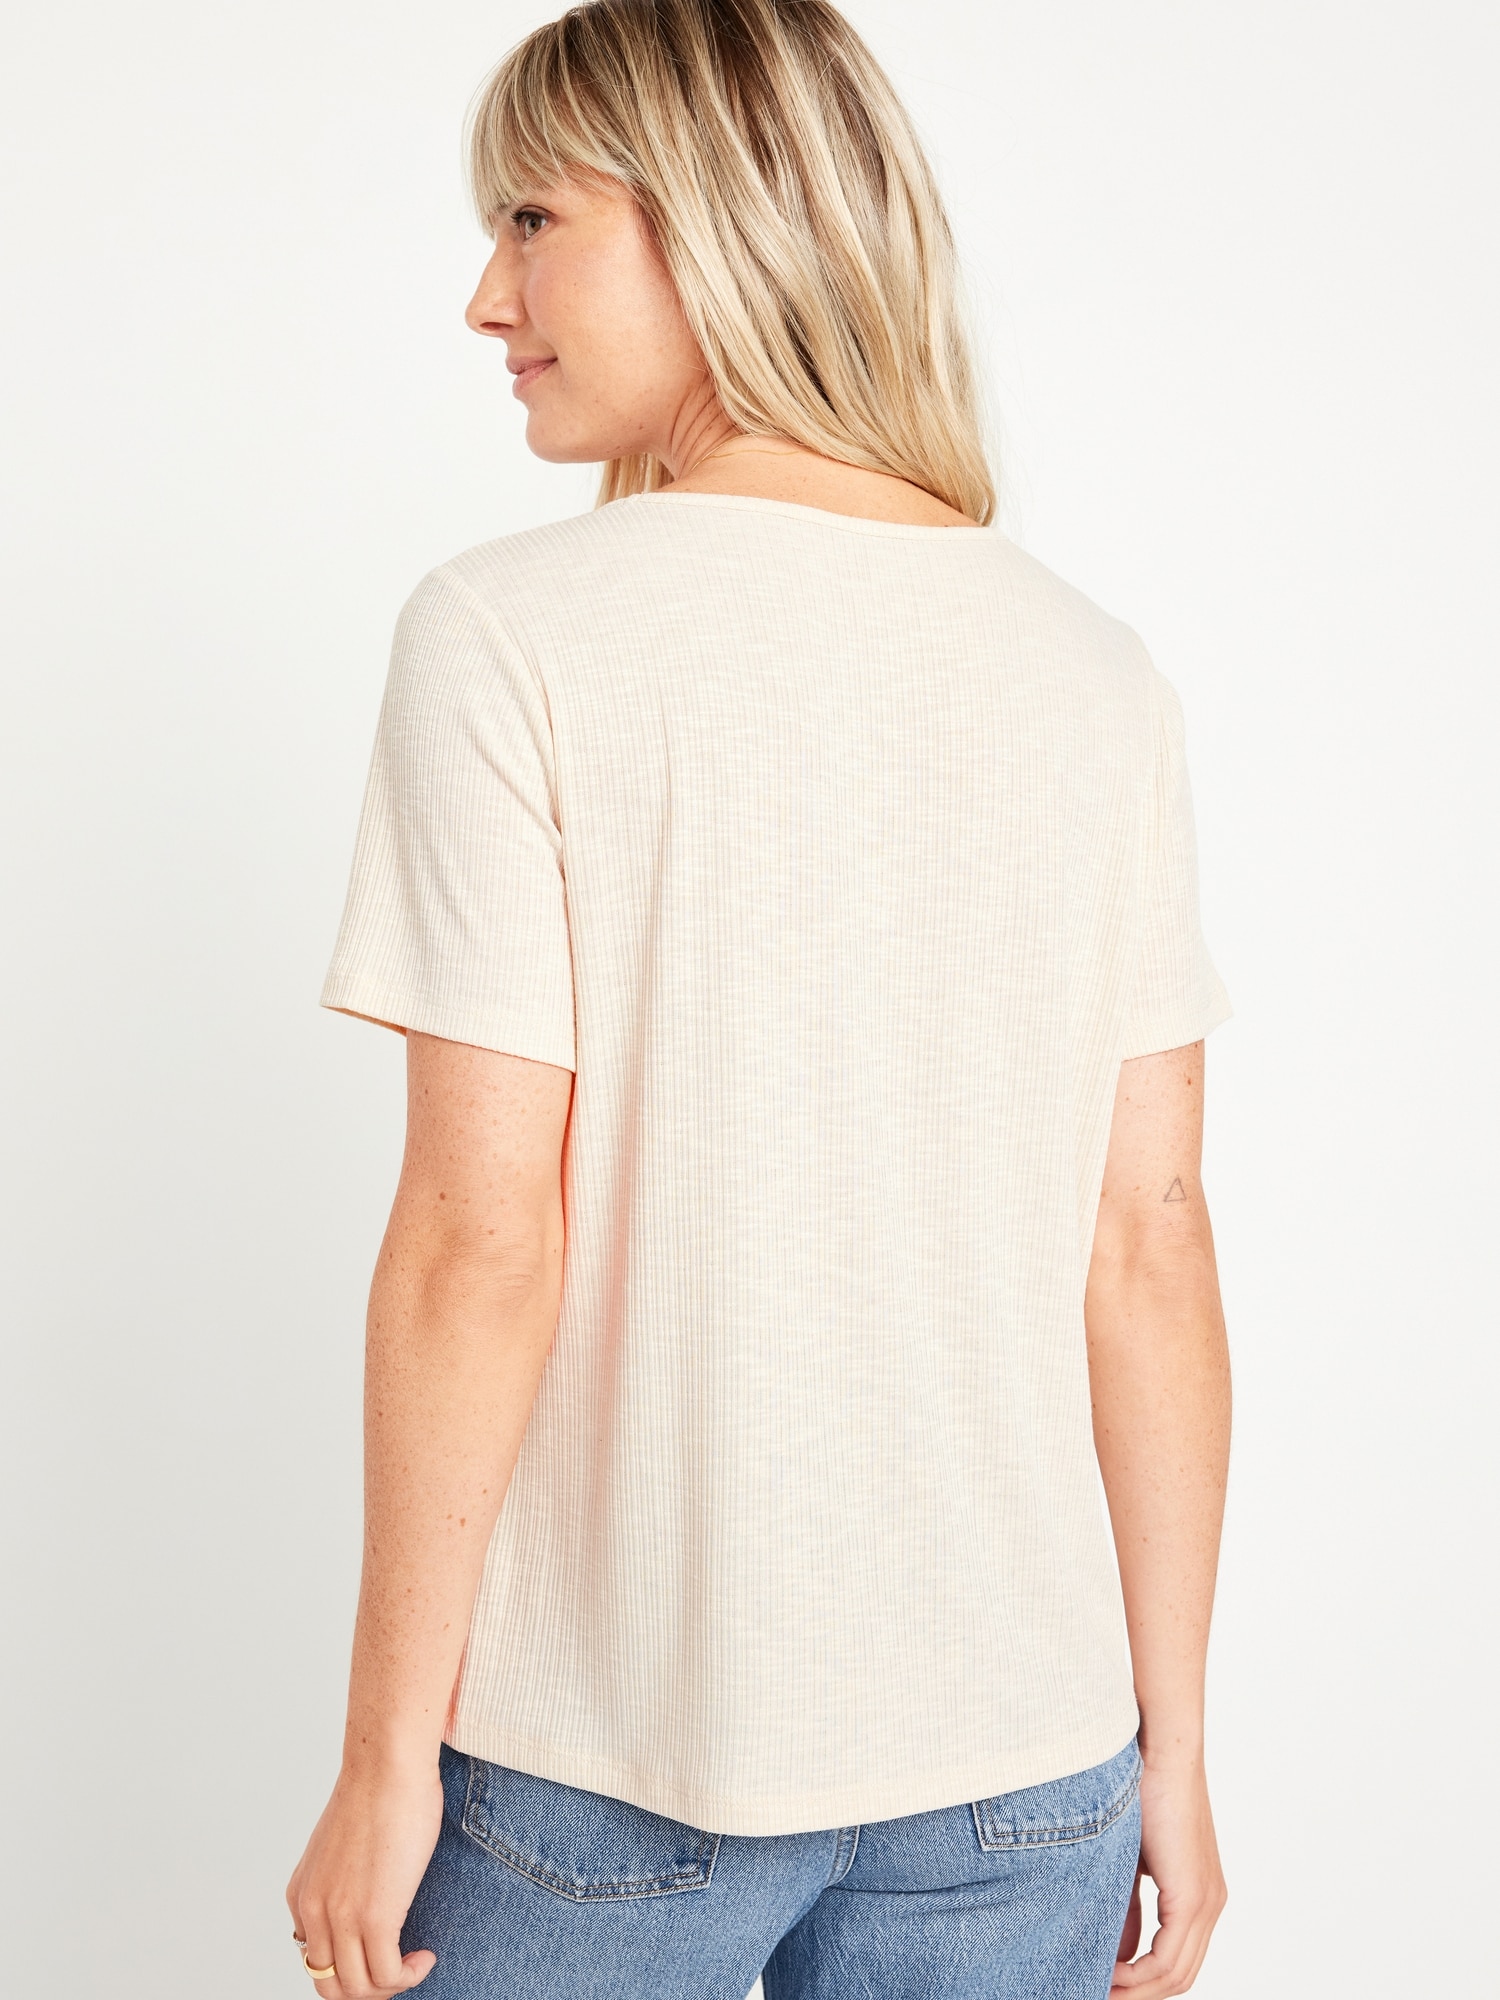 Luxe V-Neck T-Shirt Slub-Knit | Ribbed Old for Navy Women